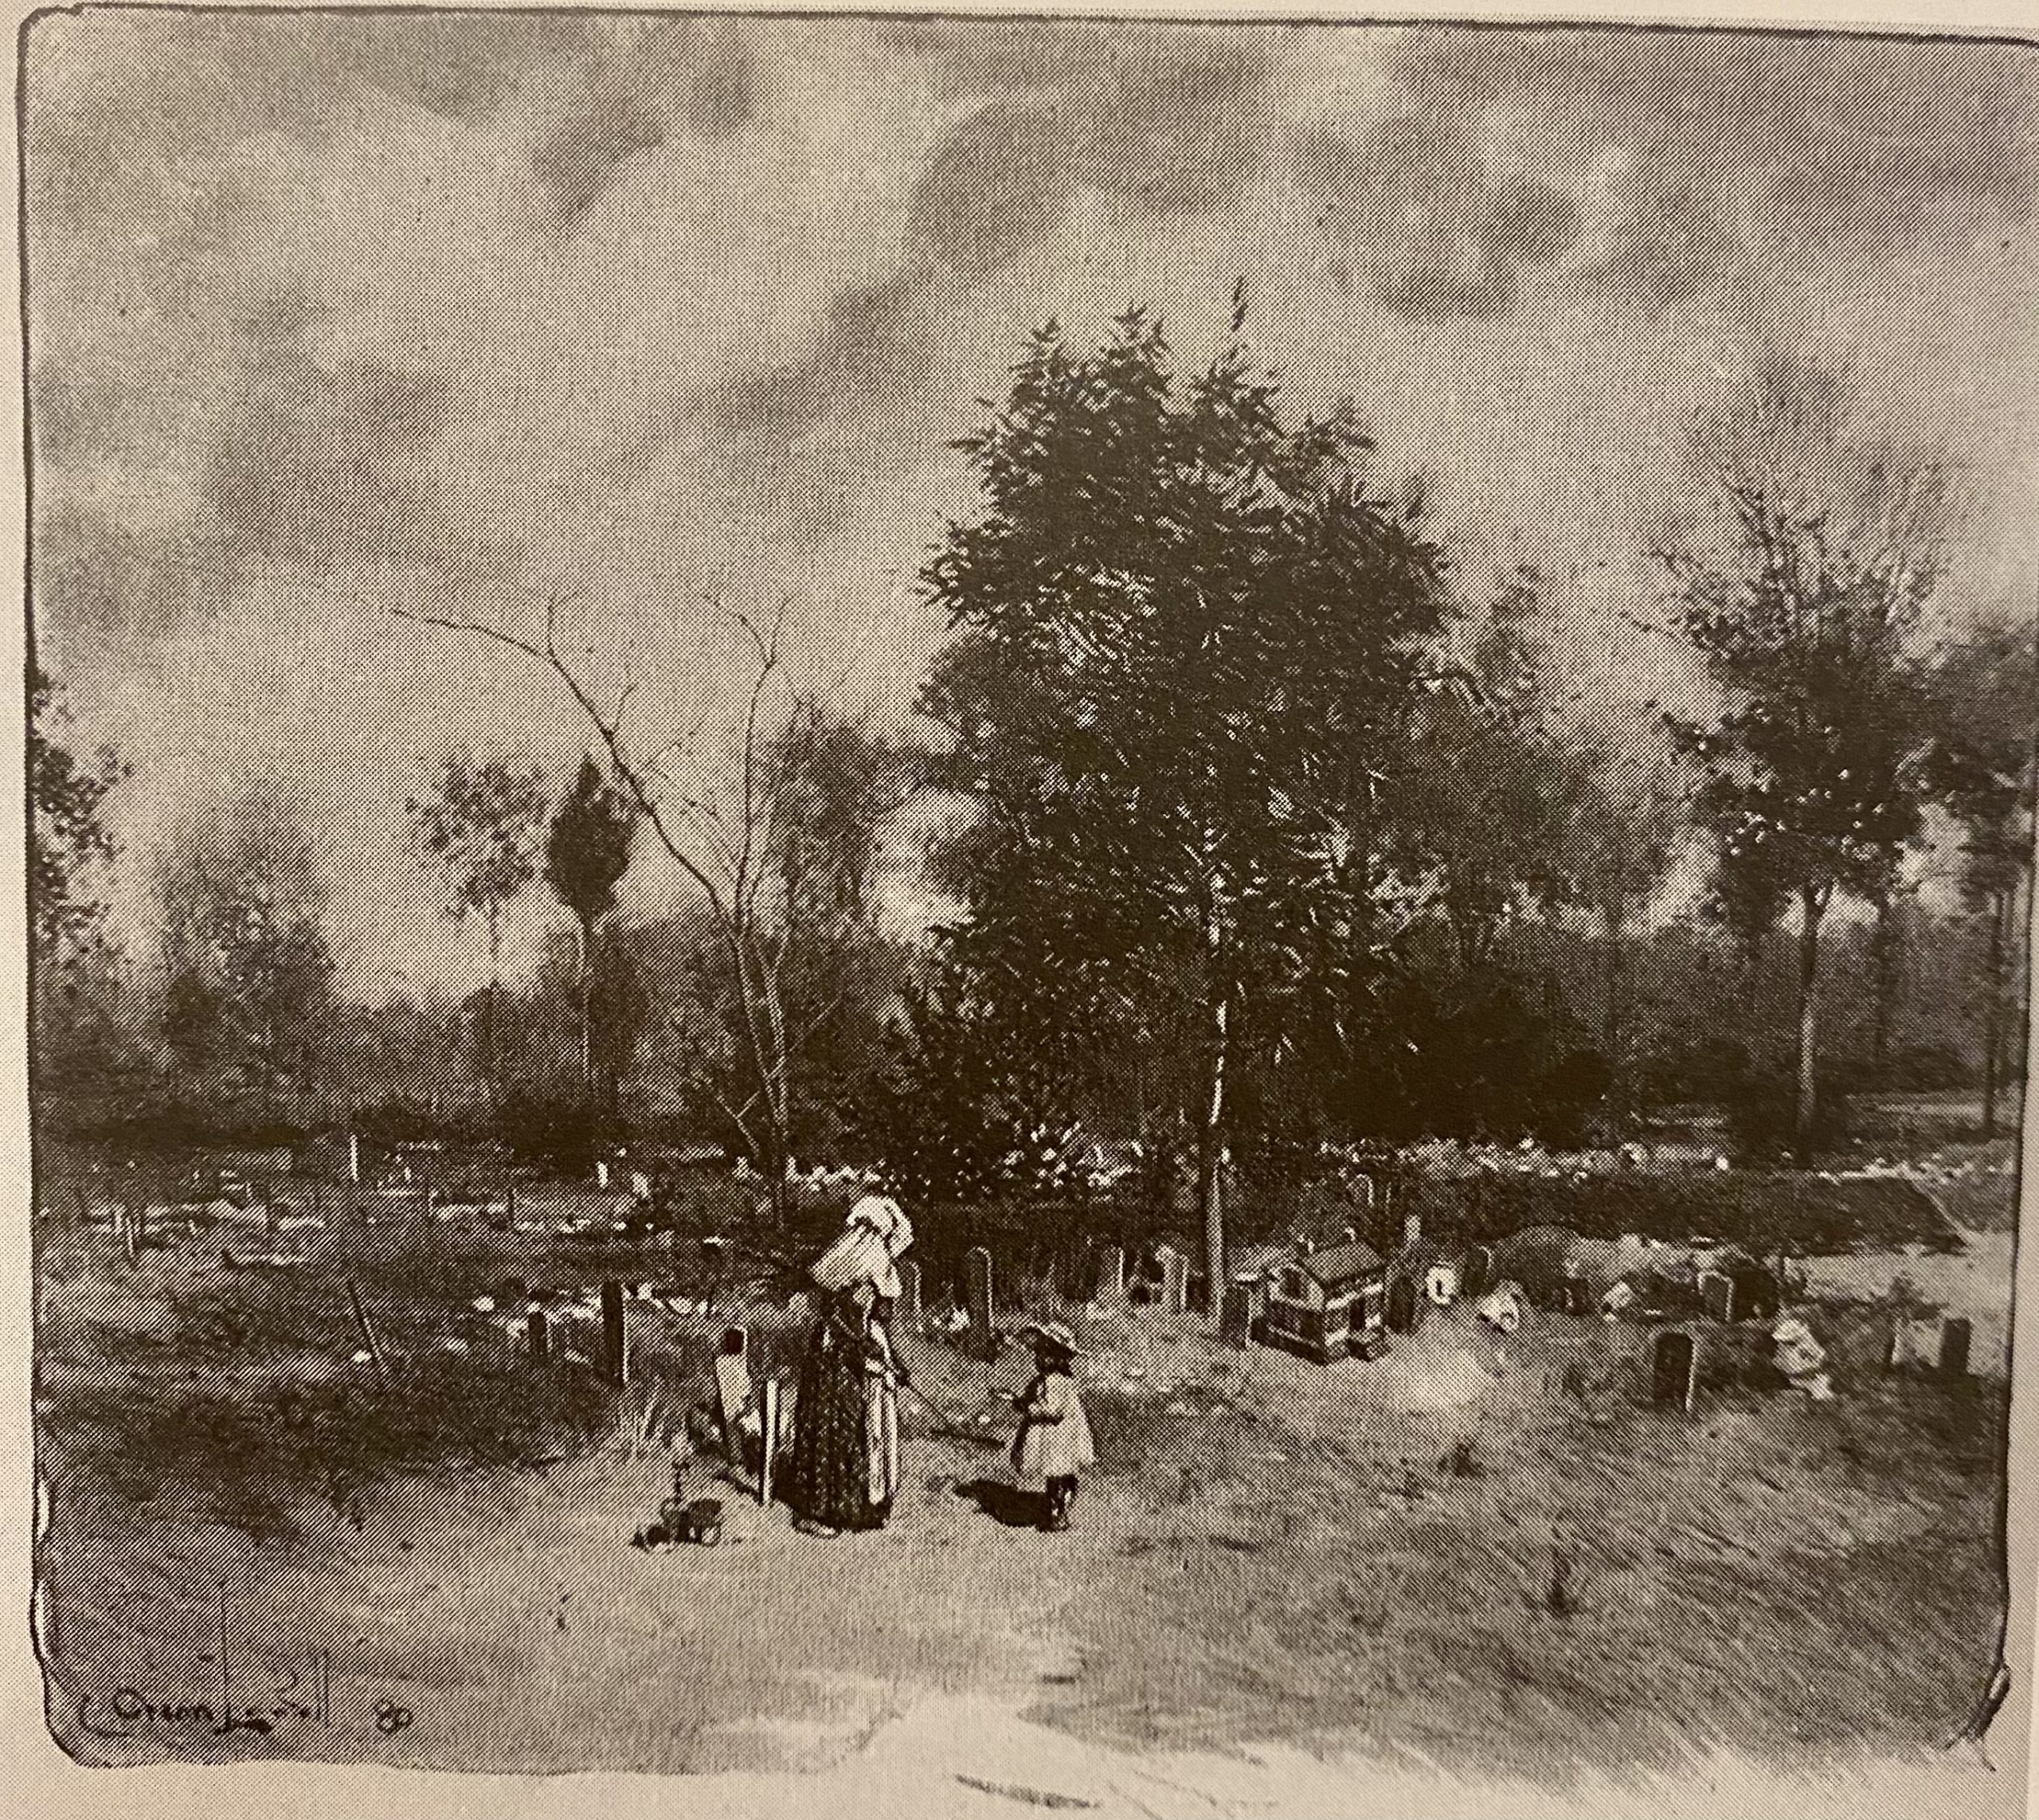 Pine Forest Cemetery (Dixie or Southern Scenes and Sketches, by Julian Ralph, 1896)